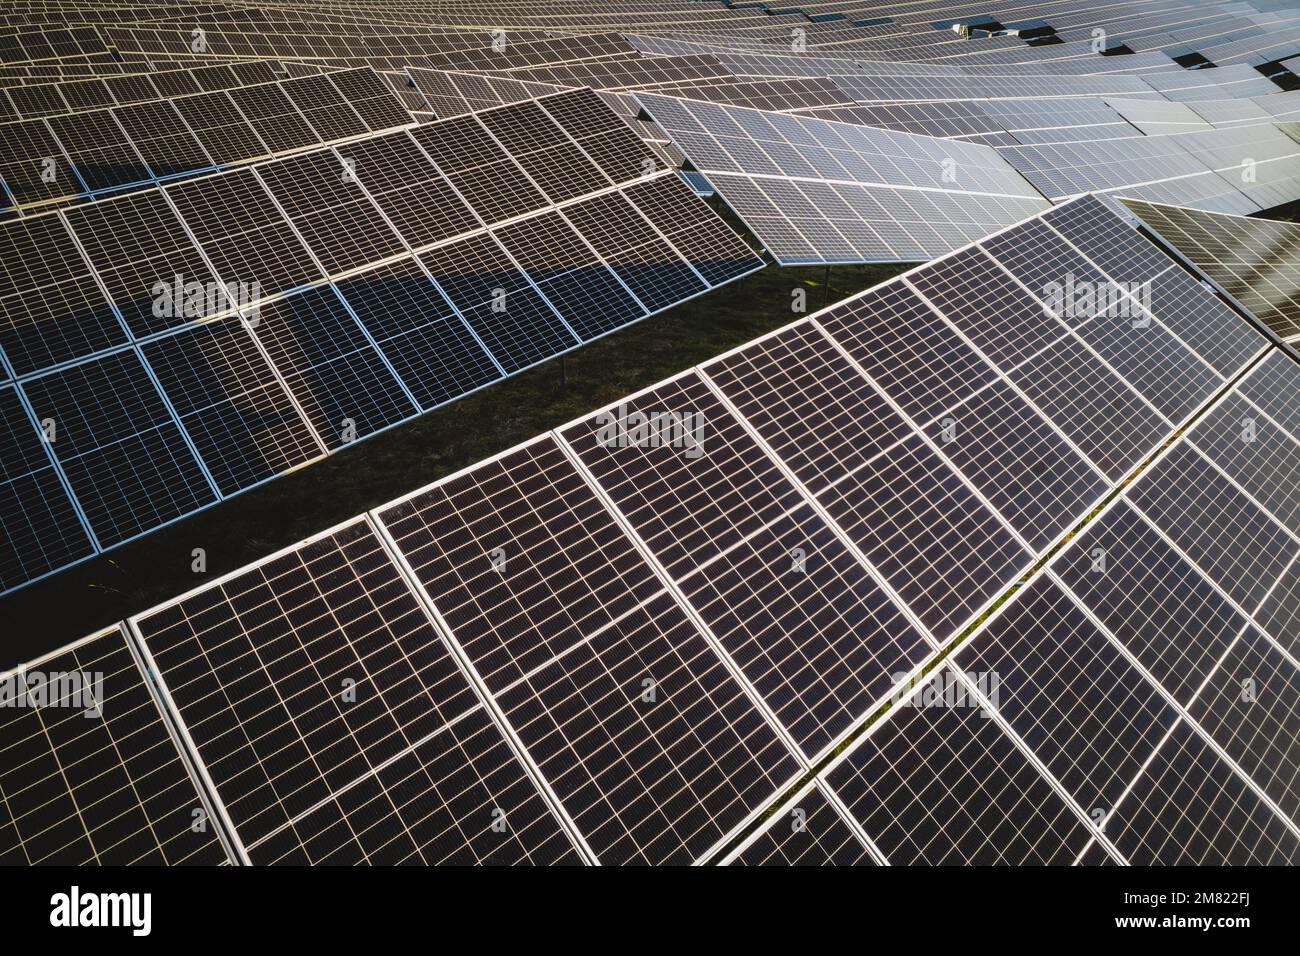 Aerial view of photovoltaic solar panels and large solar farm in Maine Stock Photo